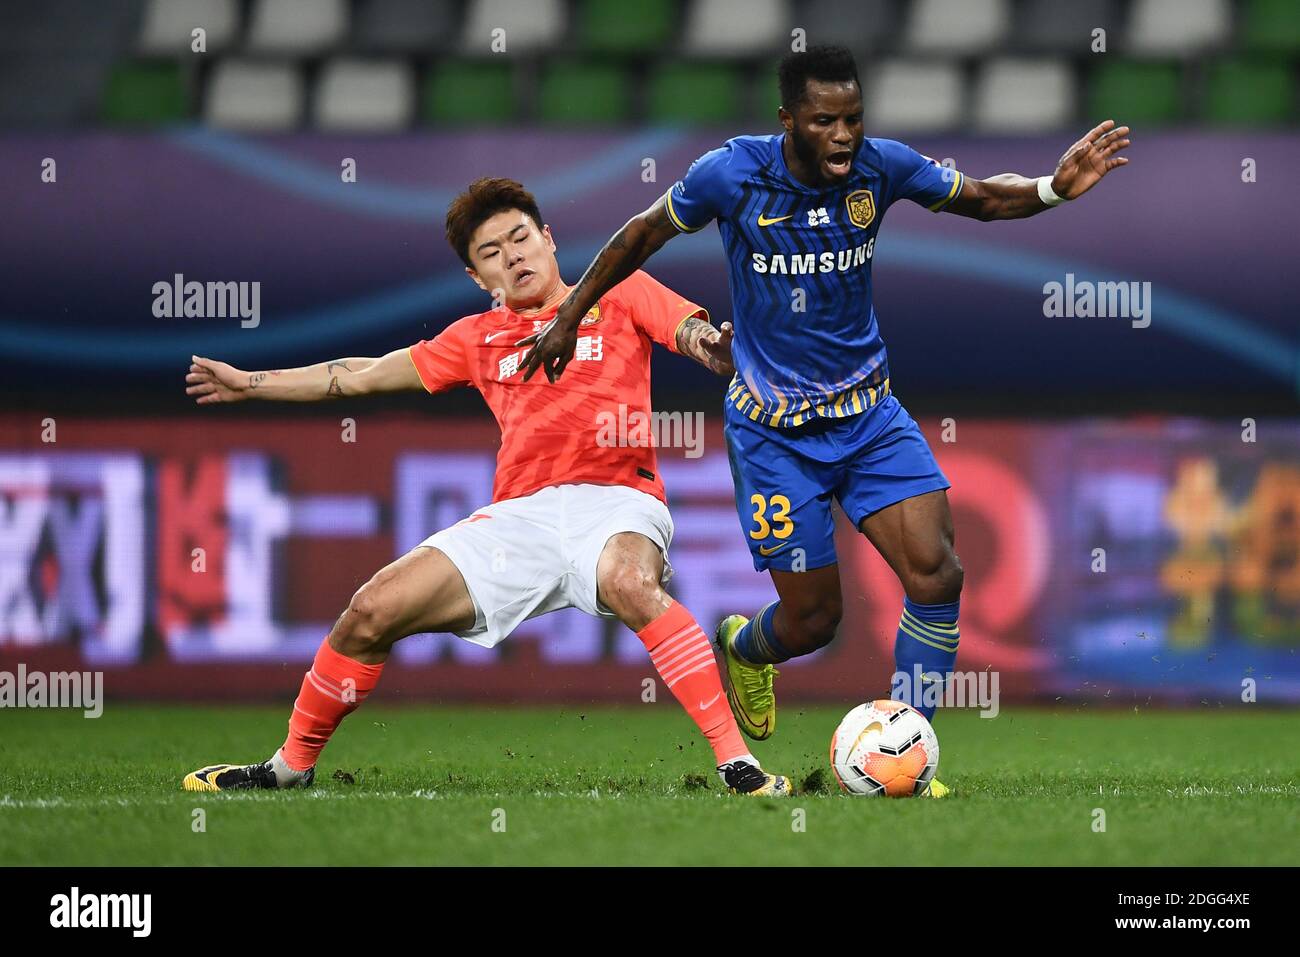 Ghanaian football player Mubarak Wakaso of Jiangsu Suning F.C., rihgt, protects the ball during the second round of the final of 2020 Chinese Super Le Stock Photo